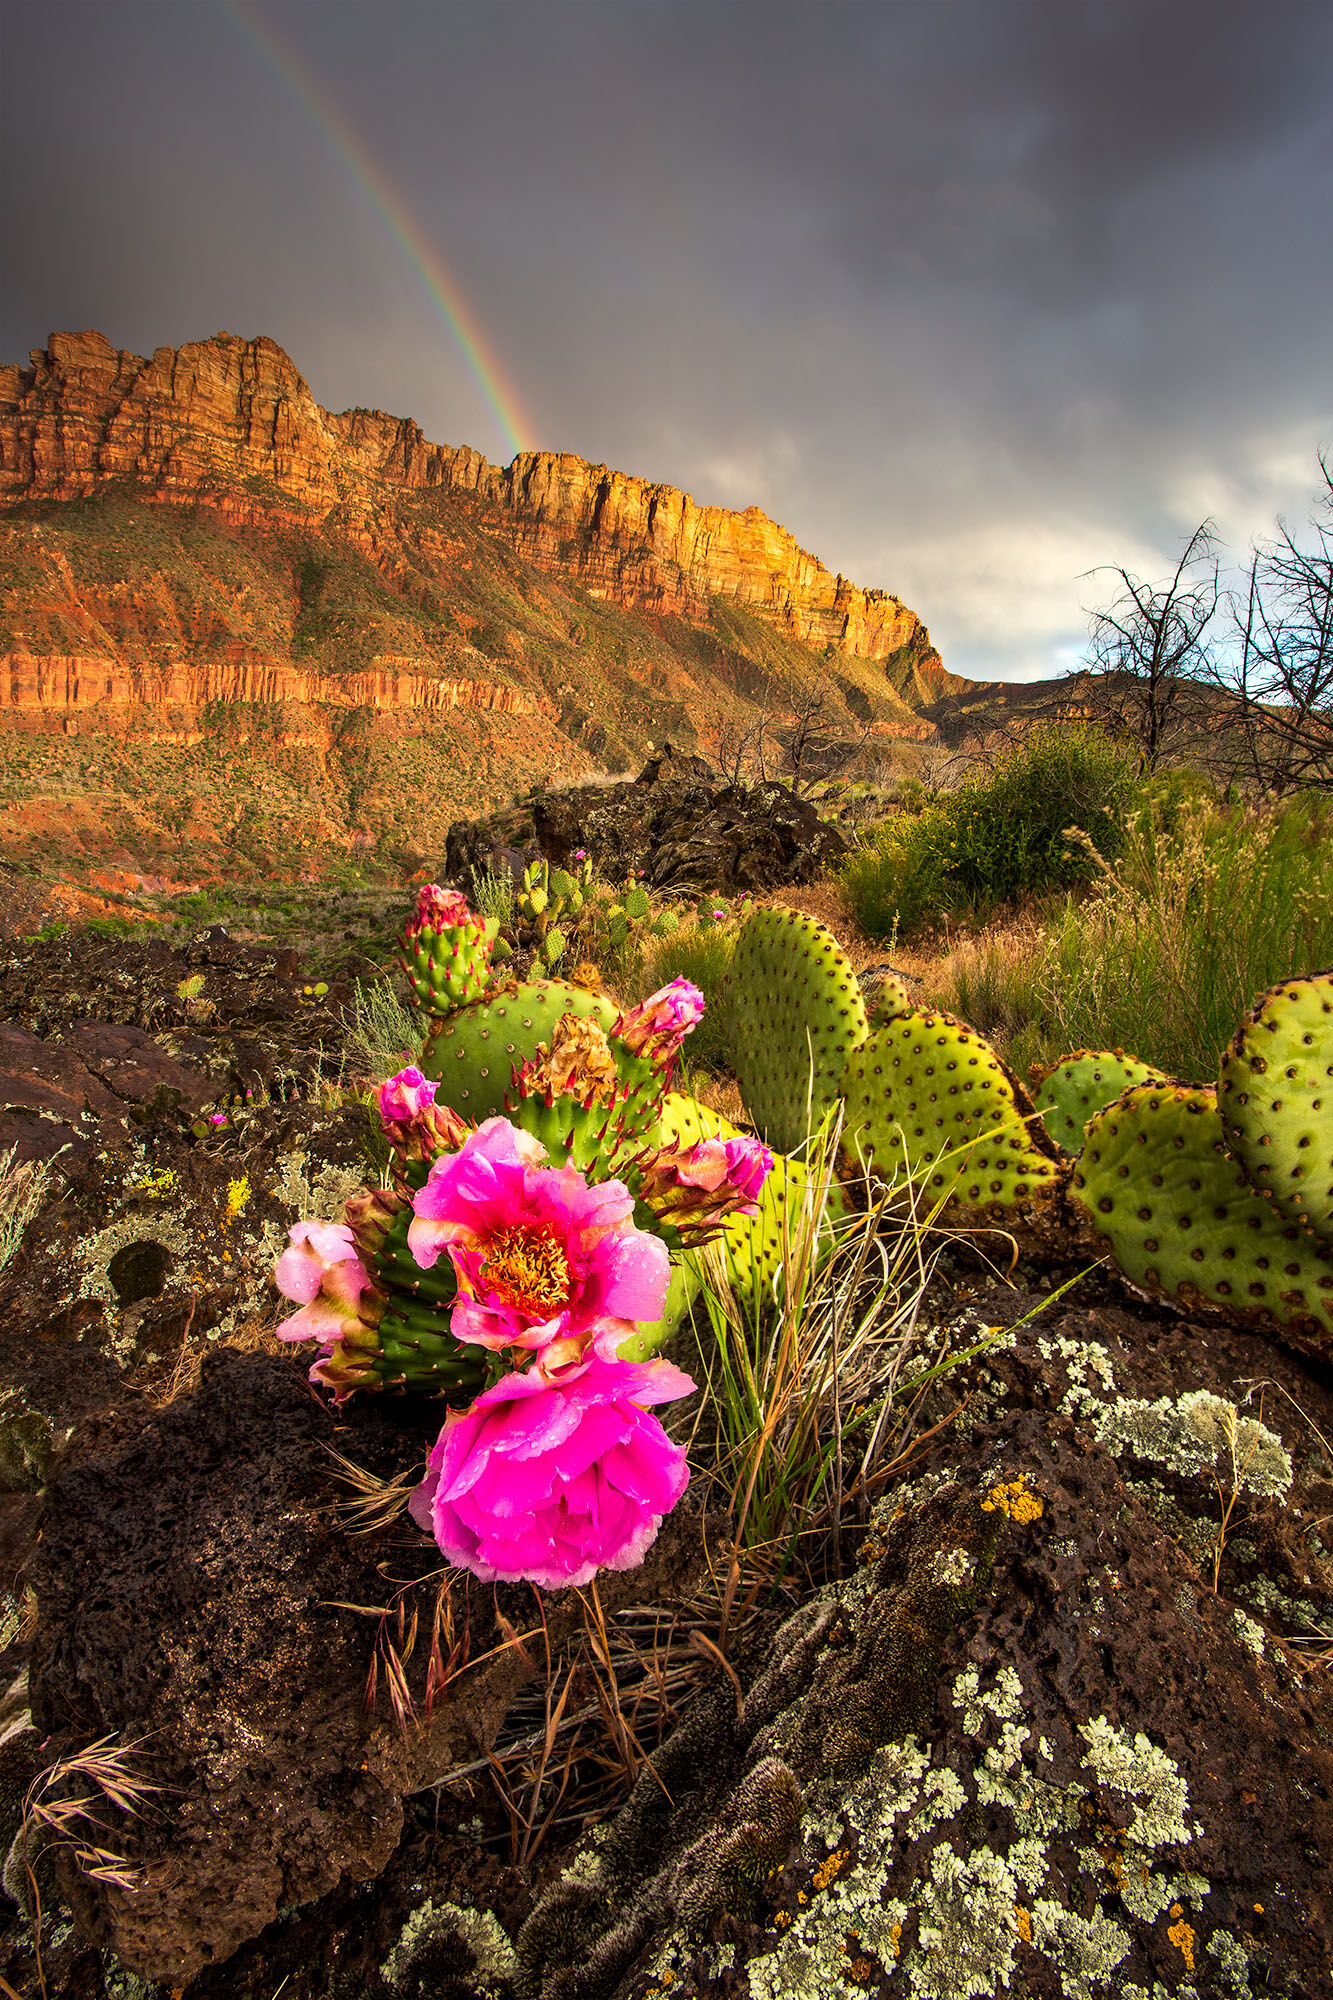 A cactus blooming in the desert with large red rock cliffs lit up at sunset at a passing rainbow. 